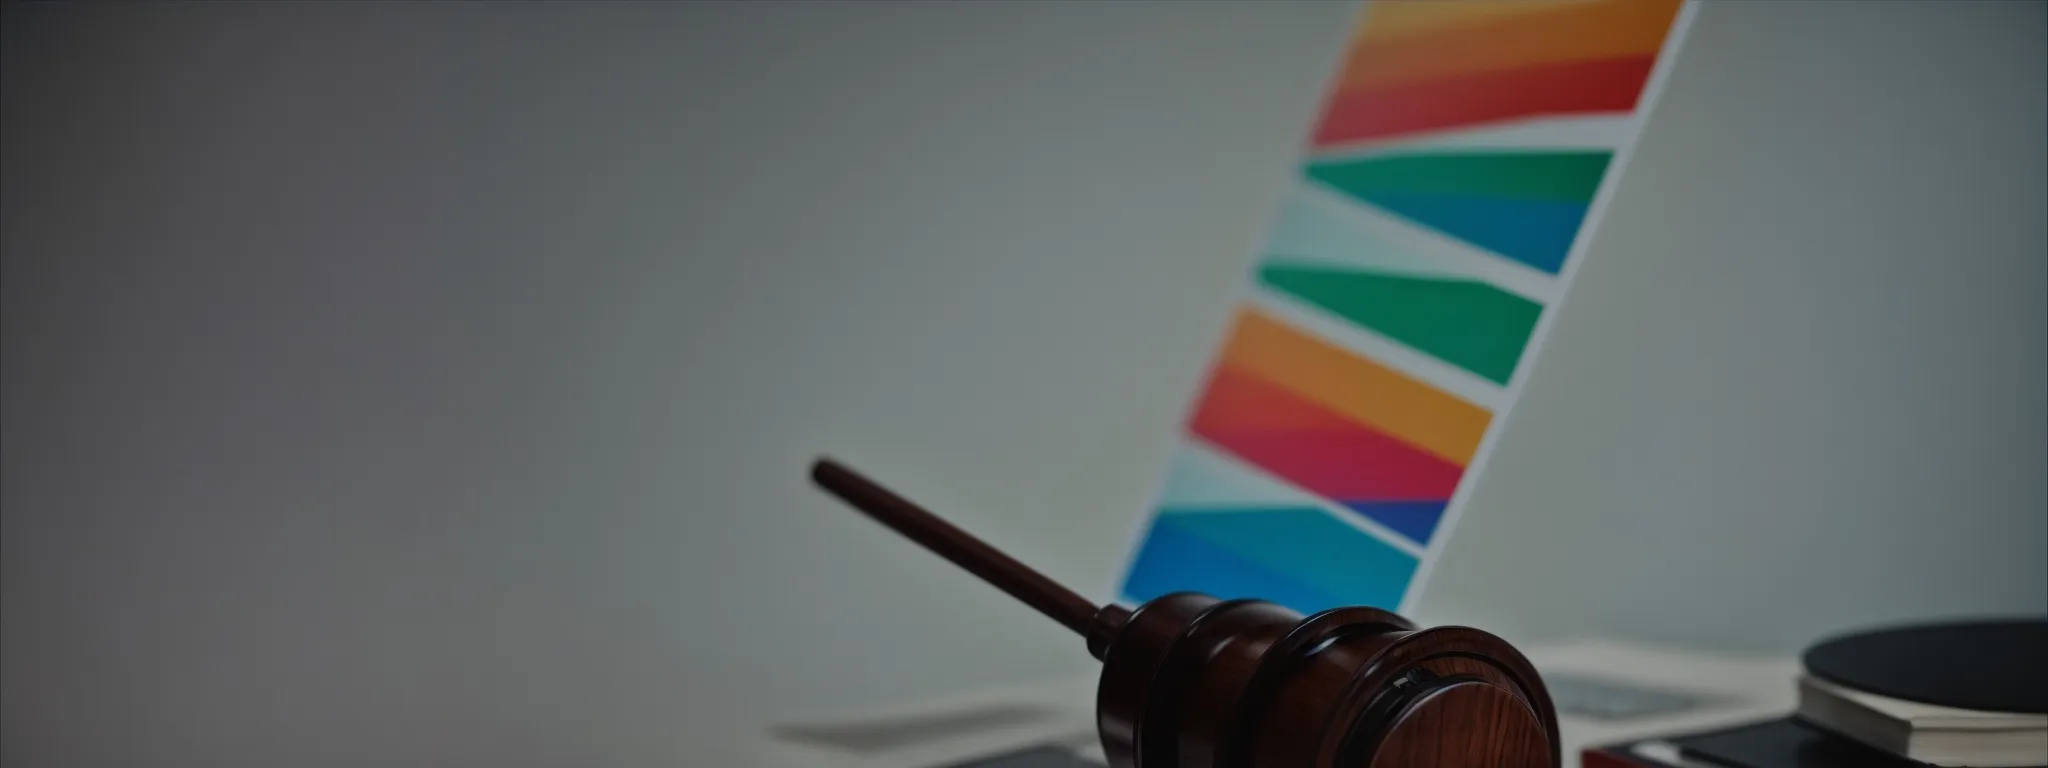 a gavel resting on a stack of legal books beside a computer displaying colorful bar graphs and pie charts.